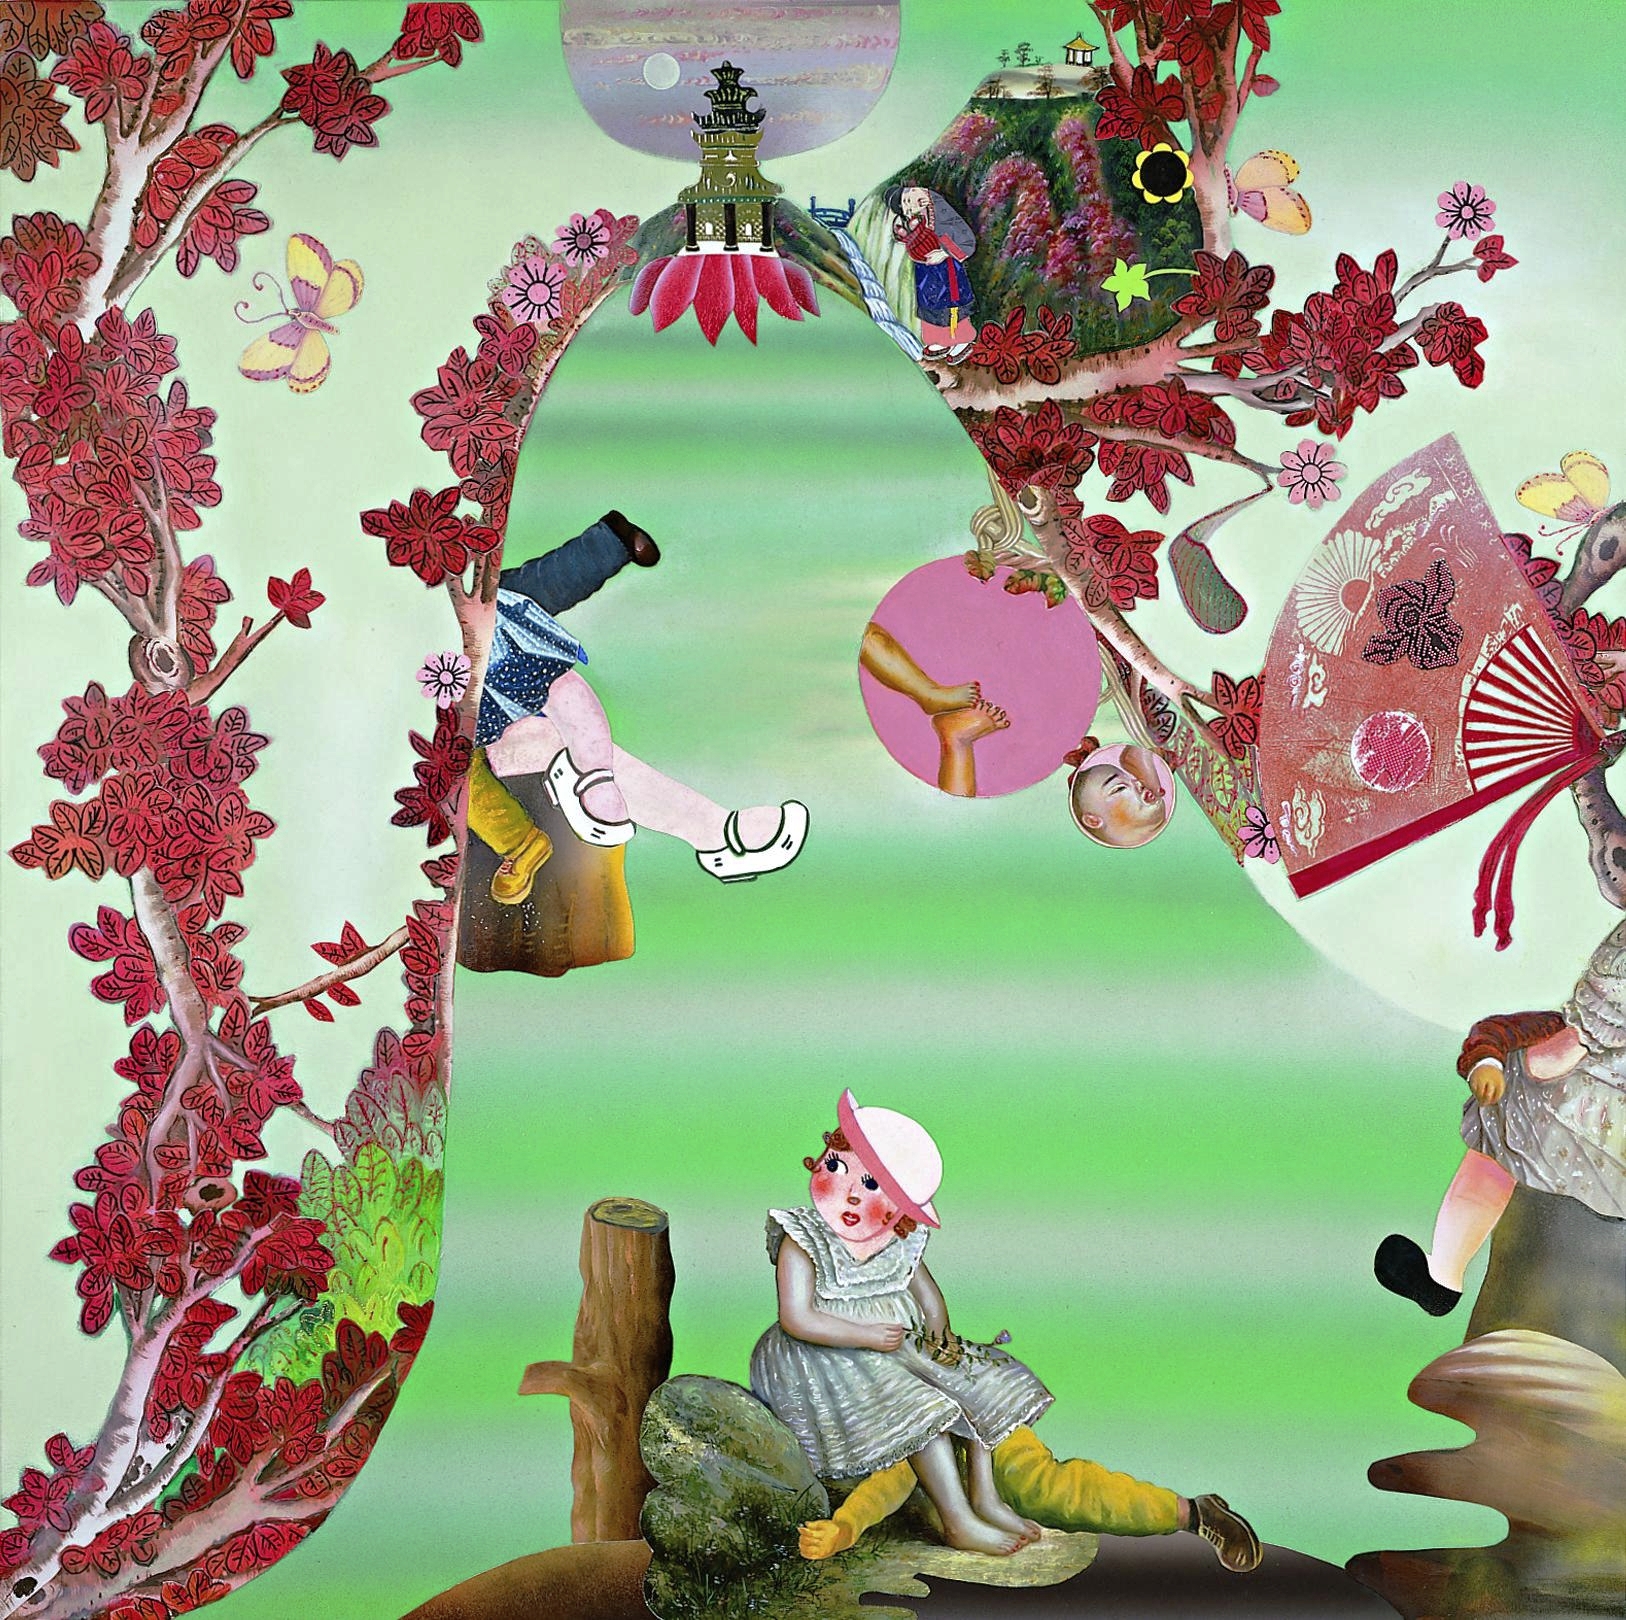 Acts of Theft, 60" × 60", mixed media and collage on canvas, 2003